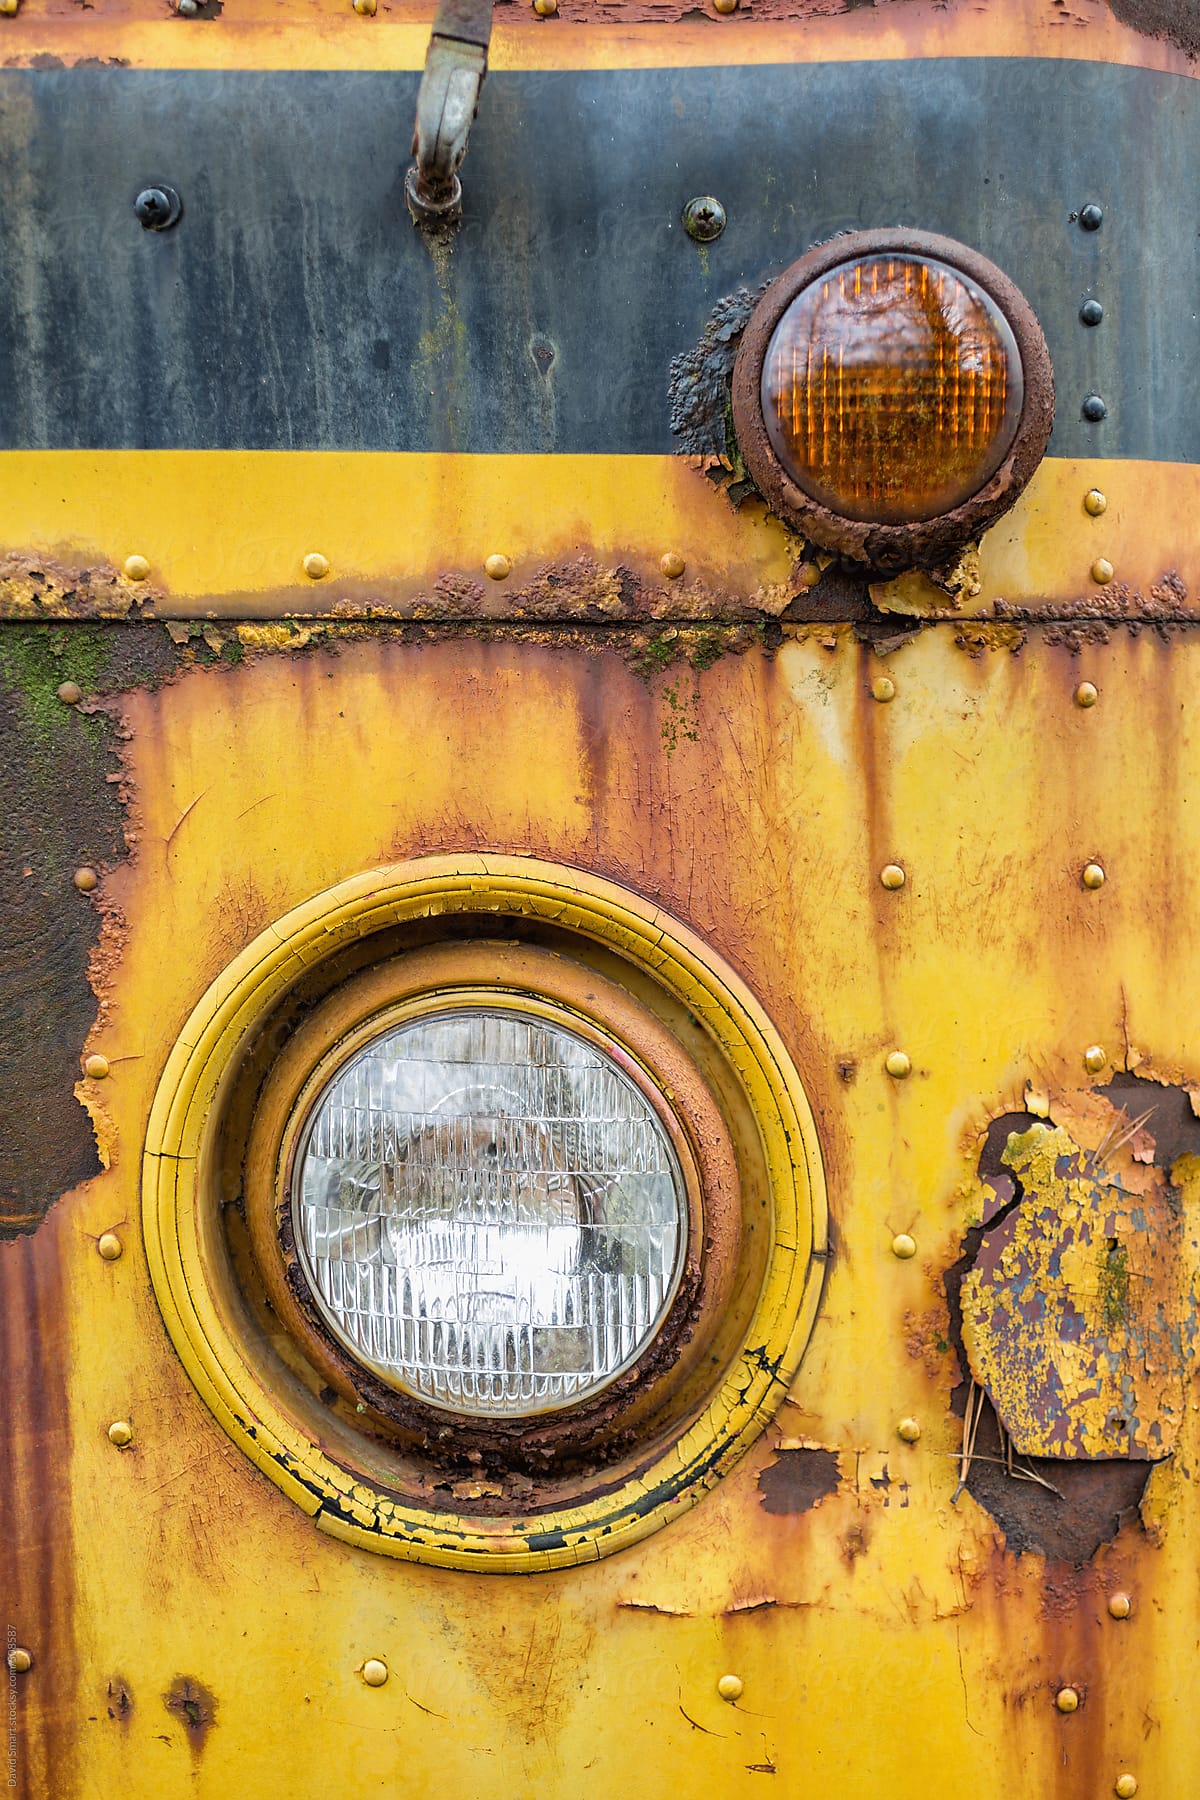 Headlight on an abandoned and decaying school bus